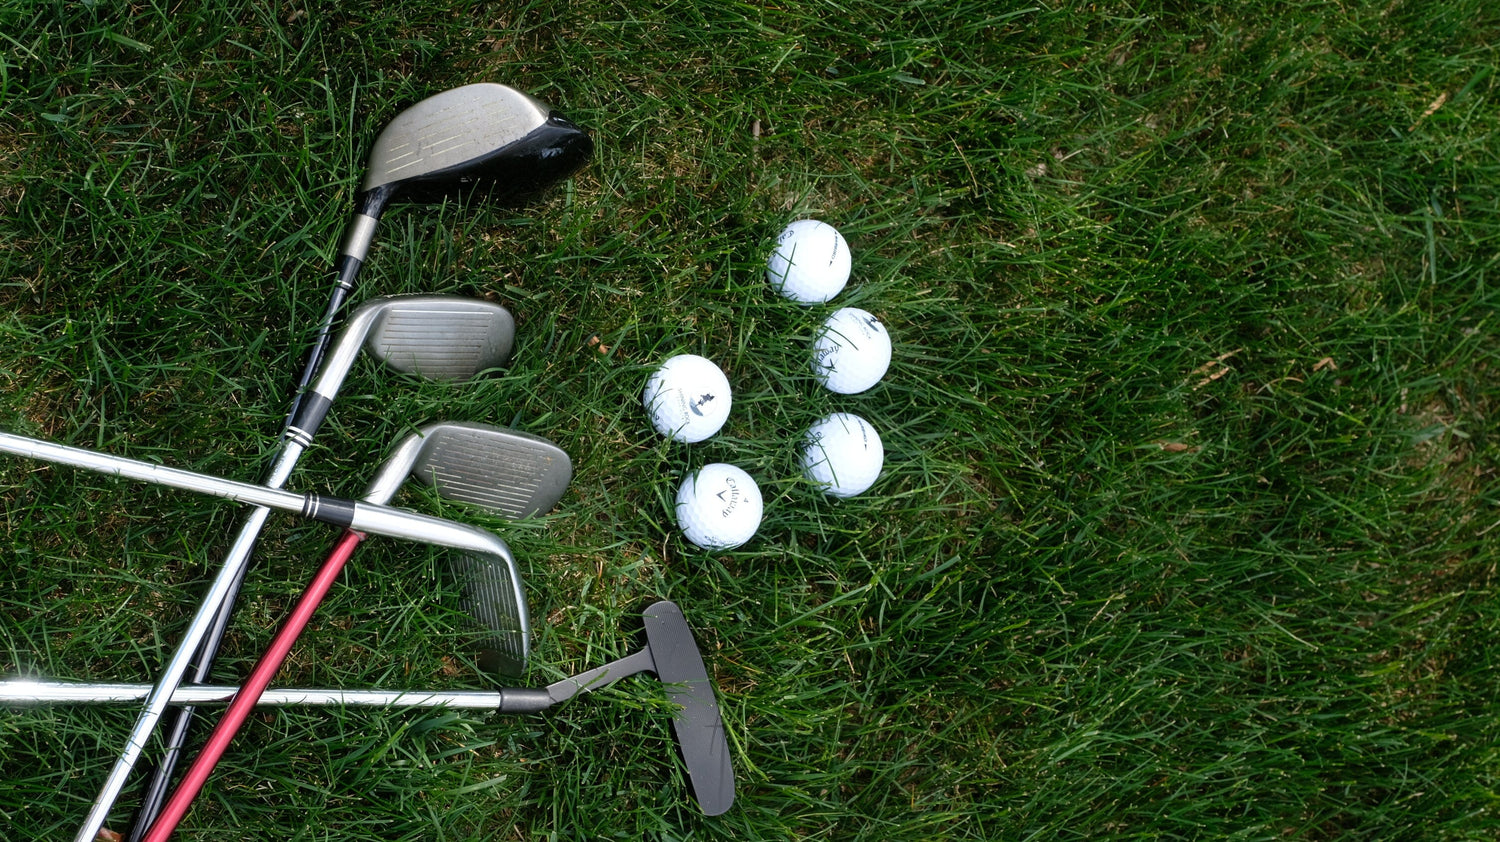 10 Simple but Effective Golf Tips for Improving Your Game